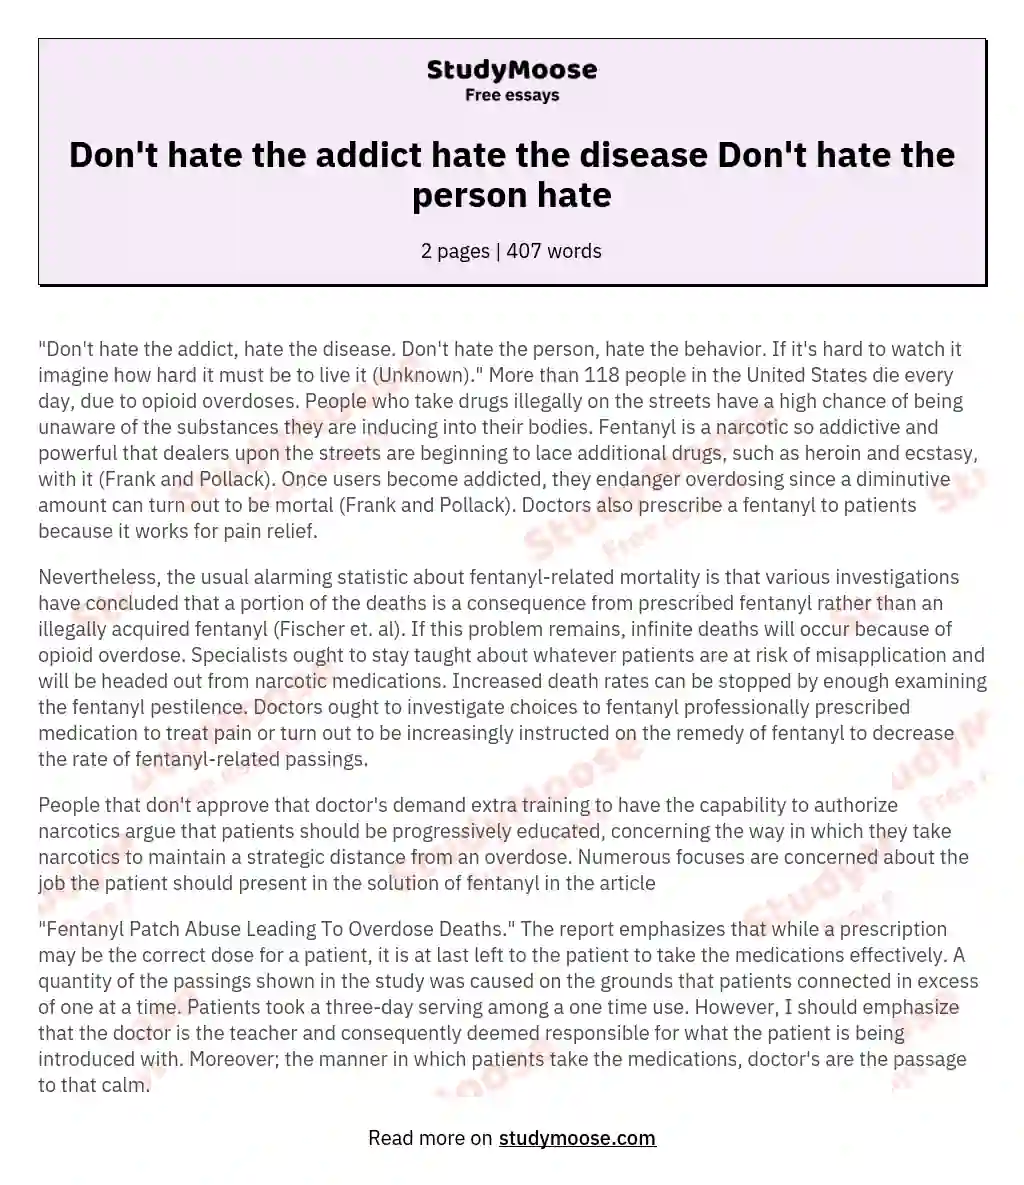 Don't hate the addict hate the disease Don't hate the person hate